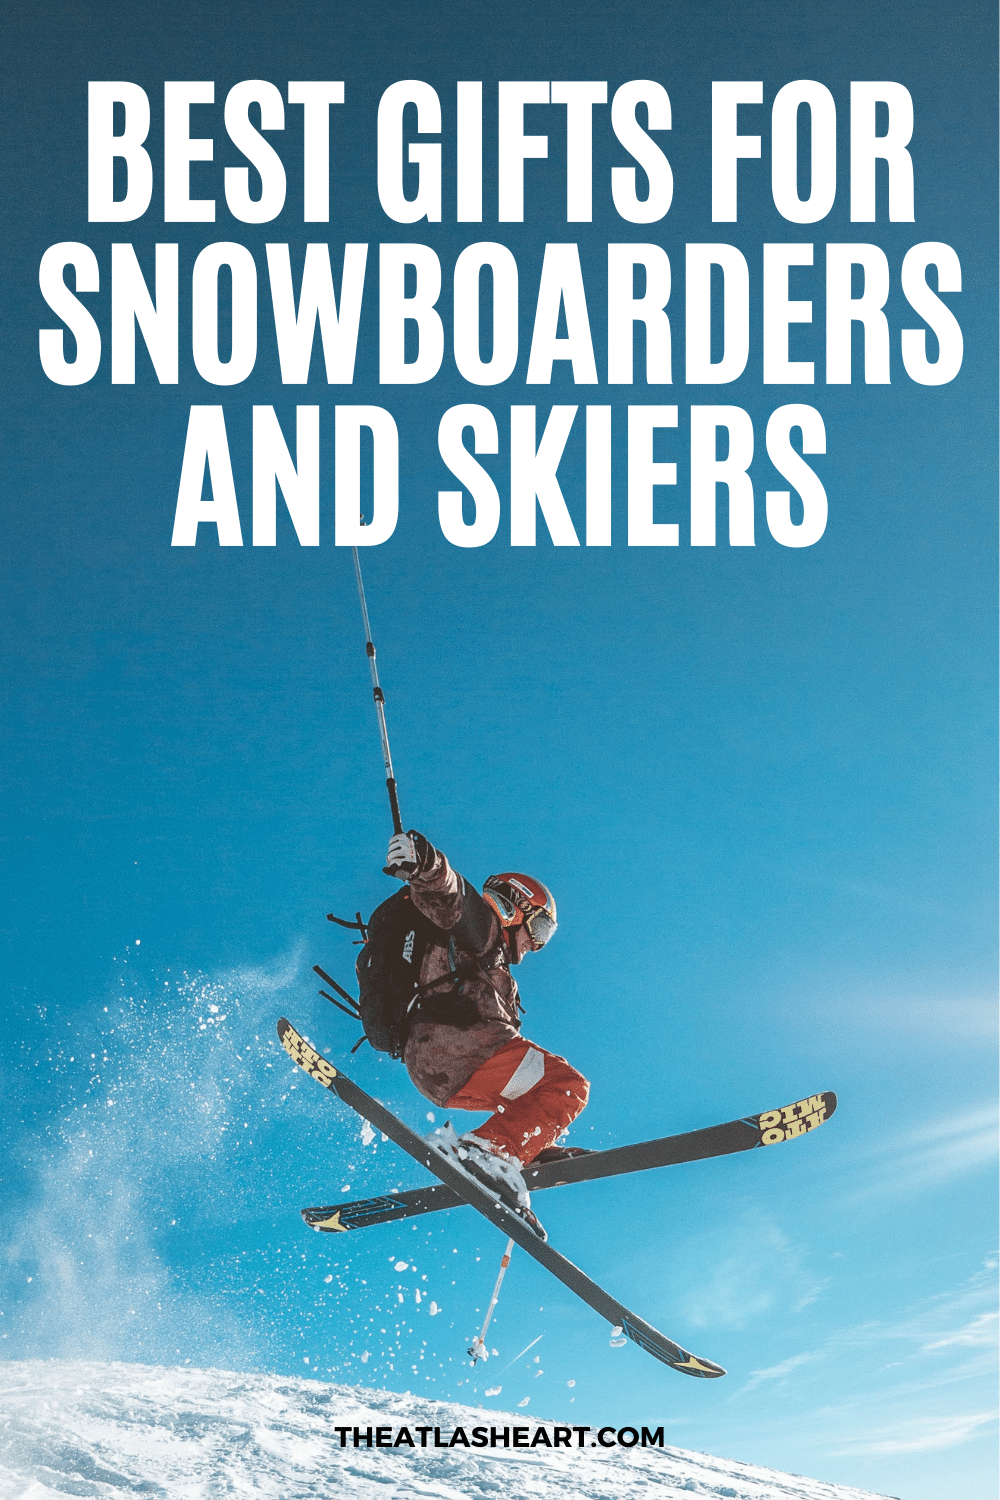 31 Best Gifts for Snowboarders and Skiers (That They’ll Actually Use)